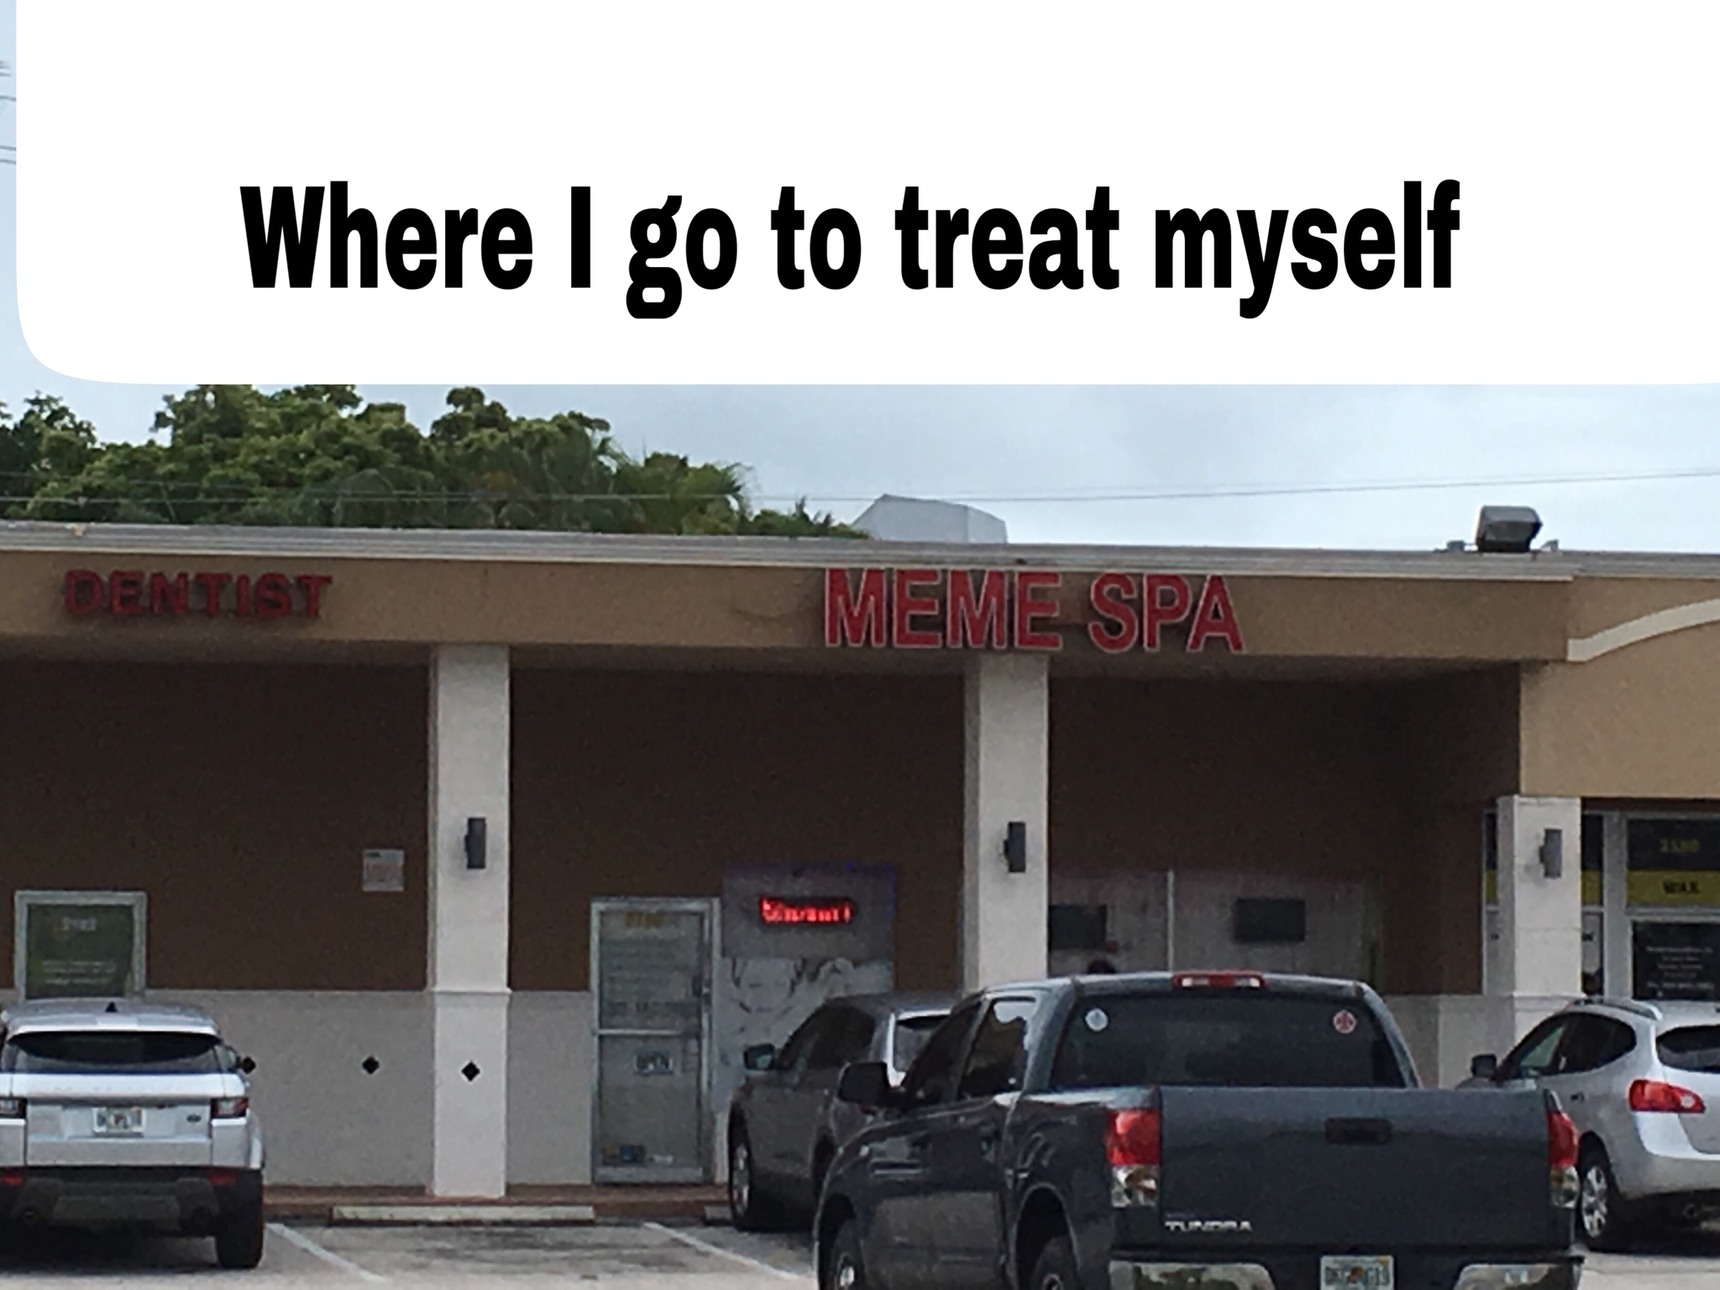 sometimes I need to get away from it all - meme